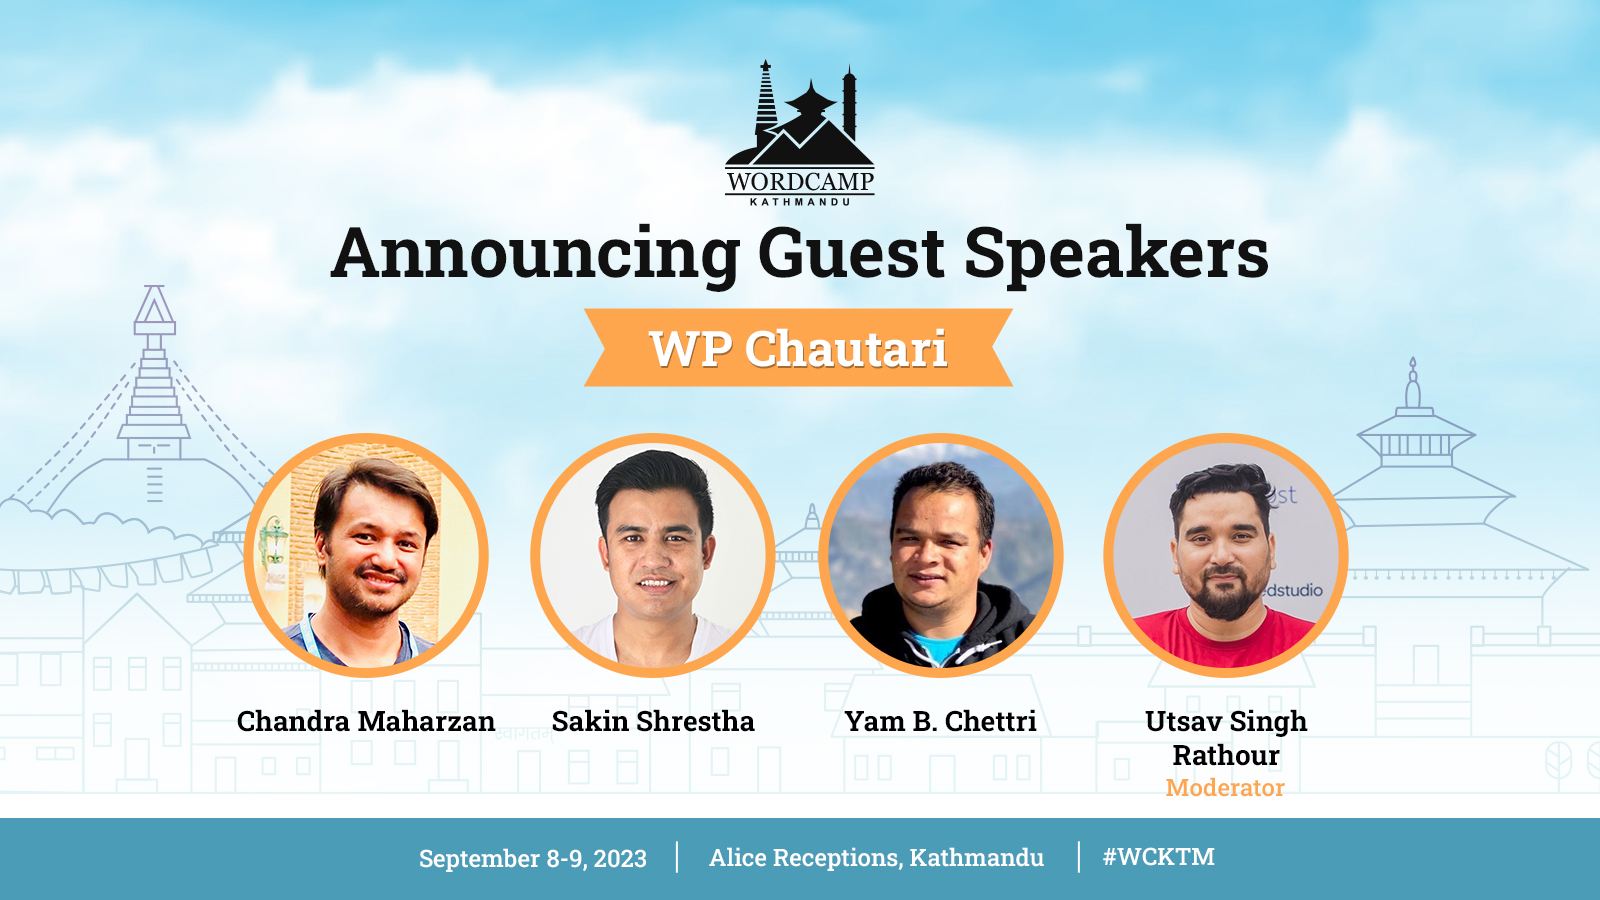 Announcing the Esteemed Guest Speakers for WP Chautari